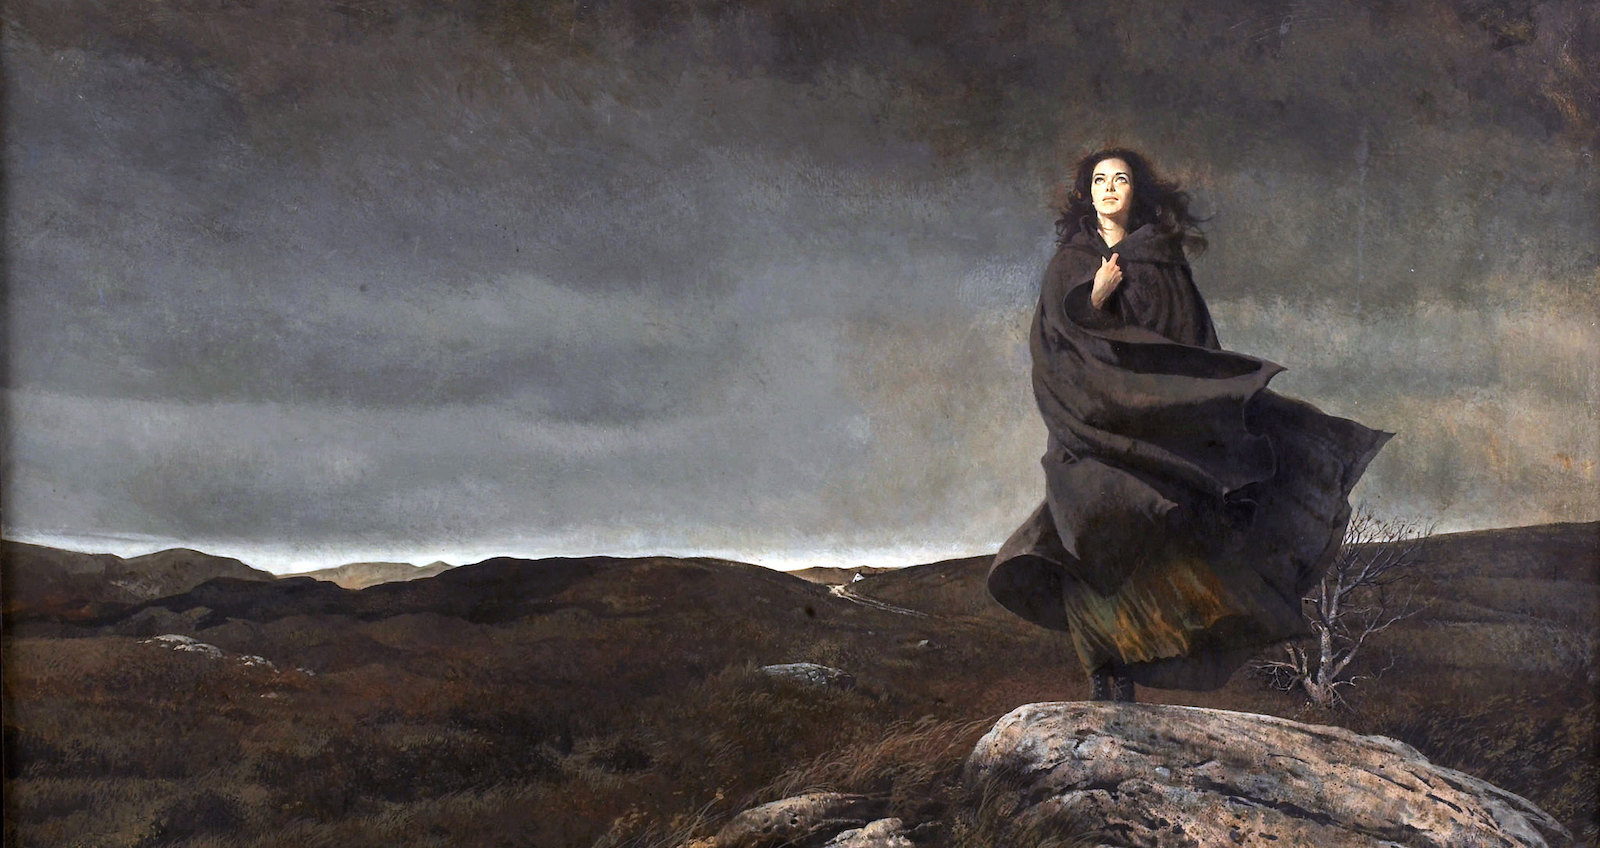 Death, Myth and Dreaming in Wuthering Heights